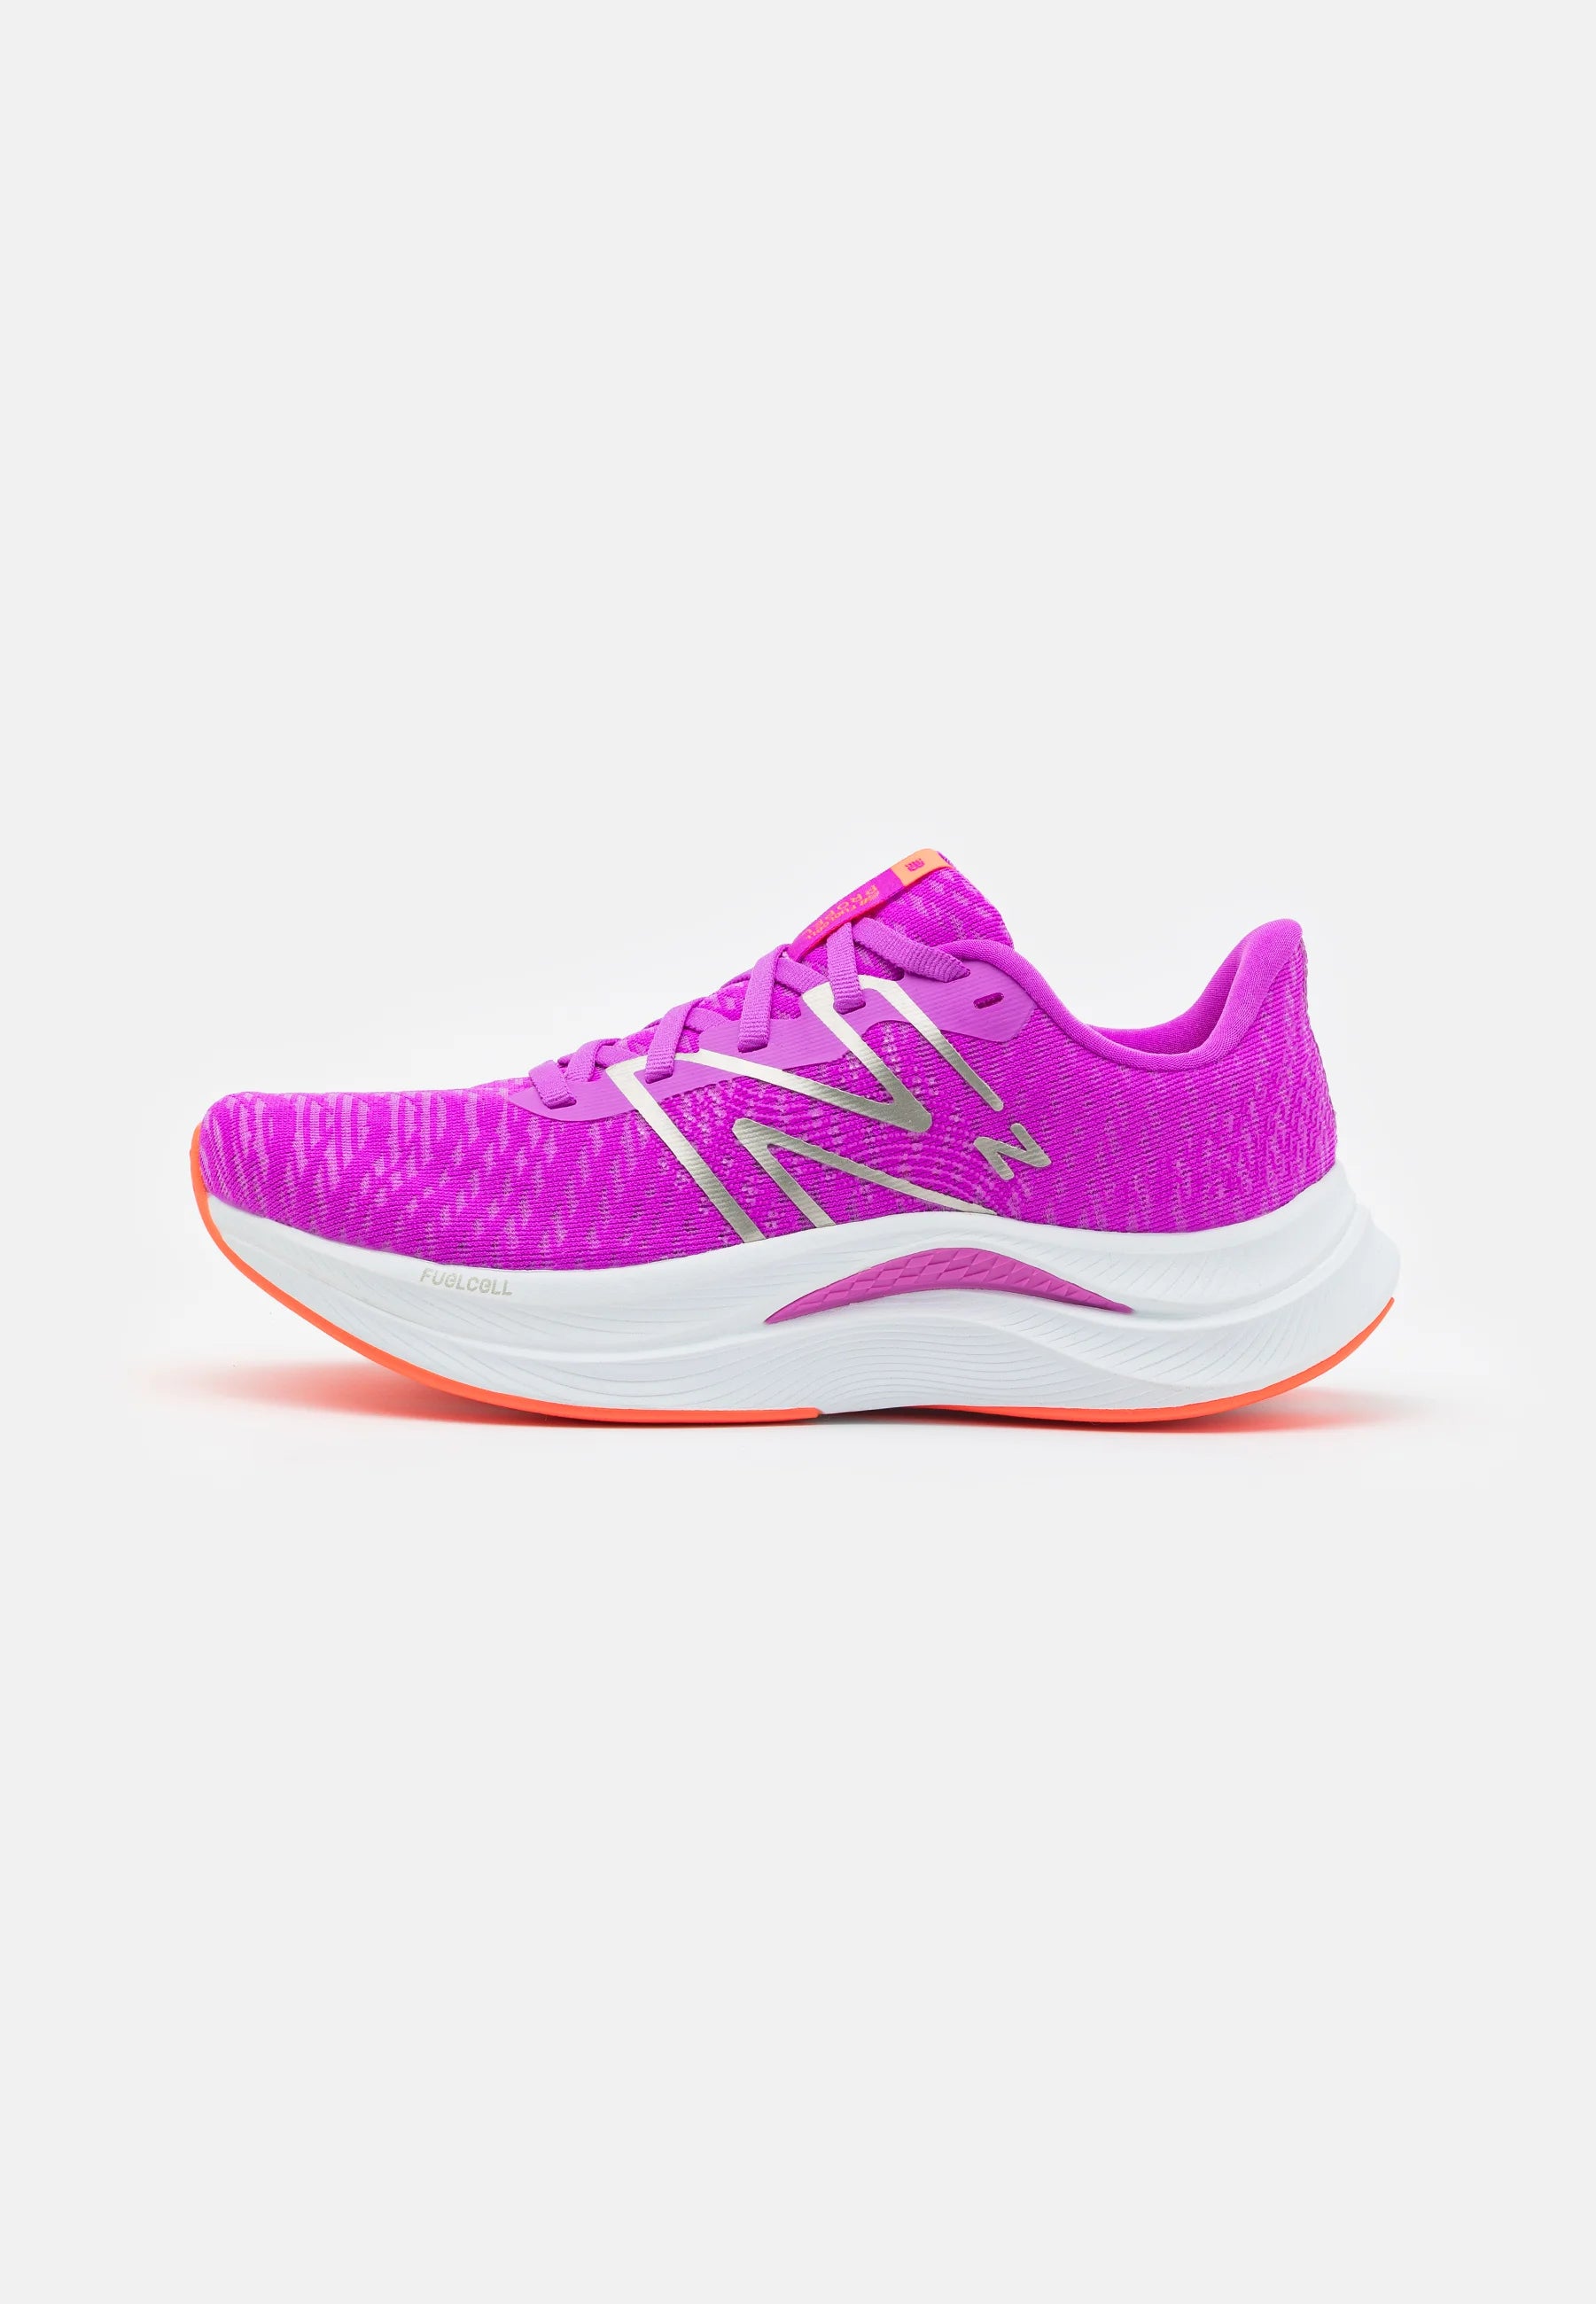 New Balance FuelCell Propel v4 Women's